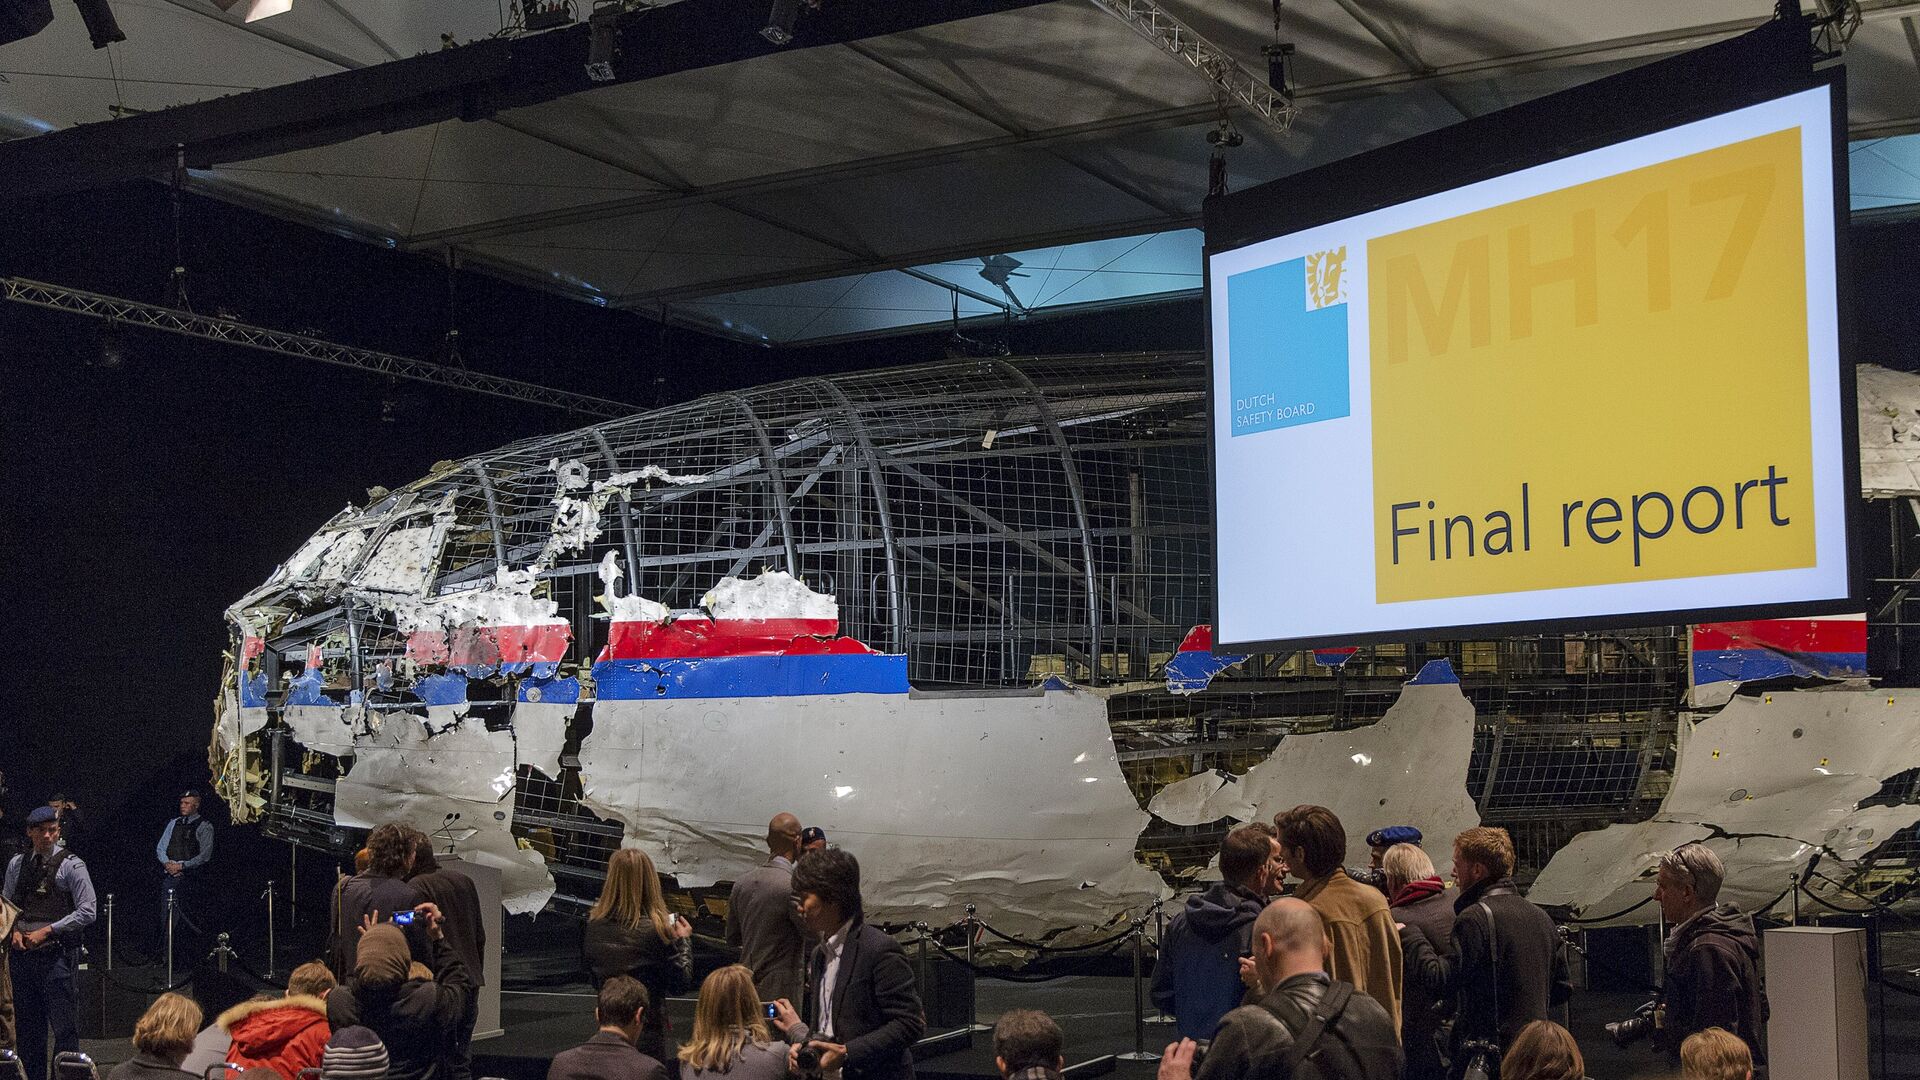 The reconstructed airplane serves as a backdrop during the presentation of the final report into the crash of July 2014 of Malaysia Airlines flight MH17 over Ukraine, in Gilze Rijen, the Netherlands, October 13, 2015 - Sputnik International, 1920, 21.12.2021